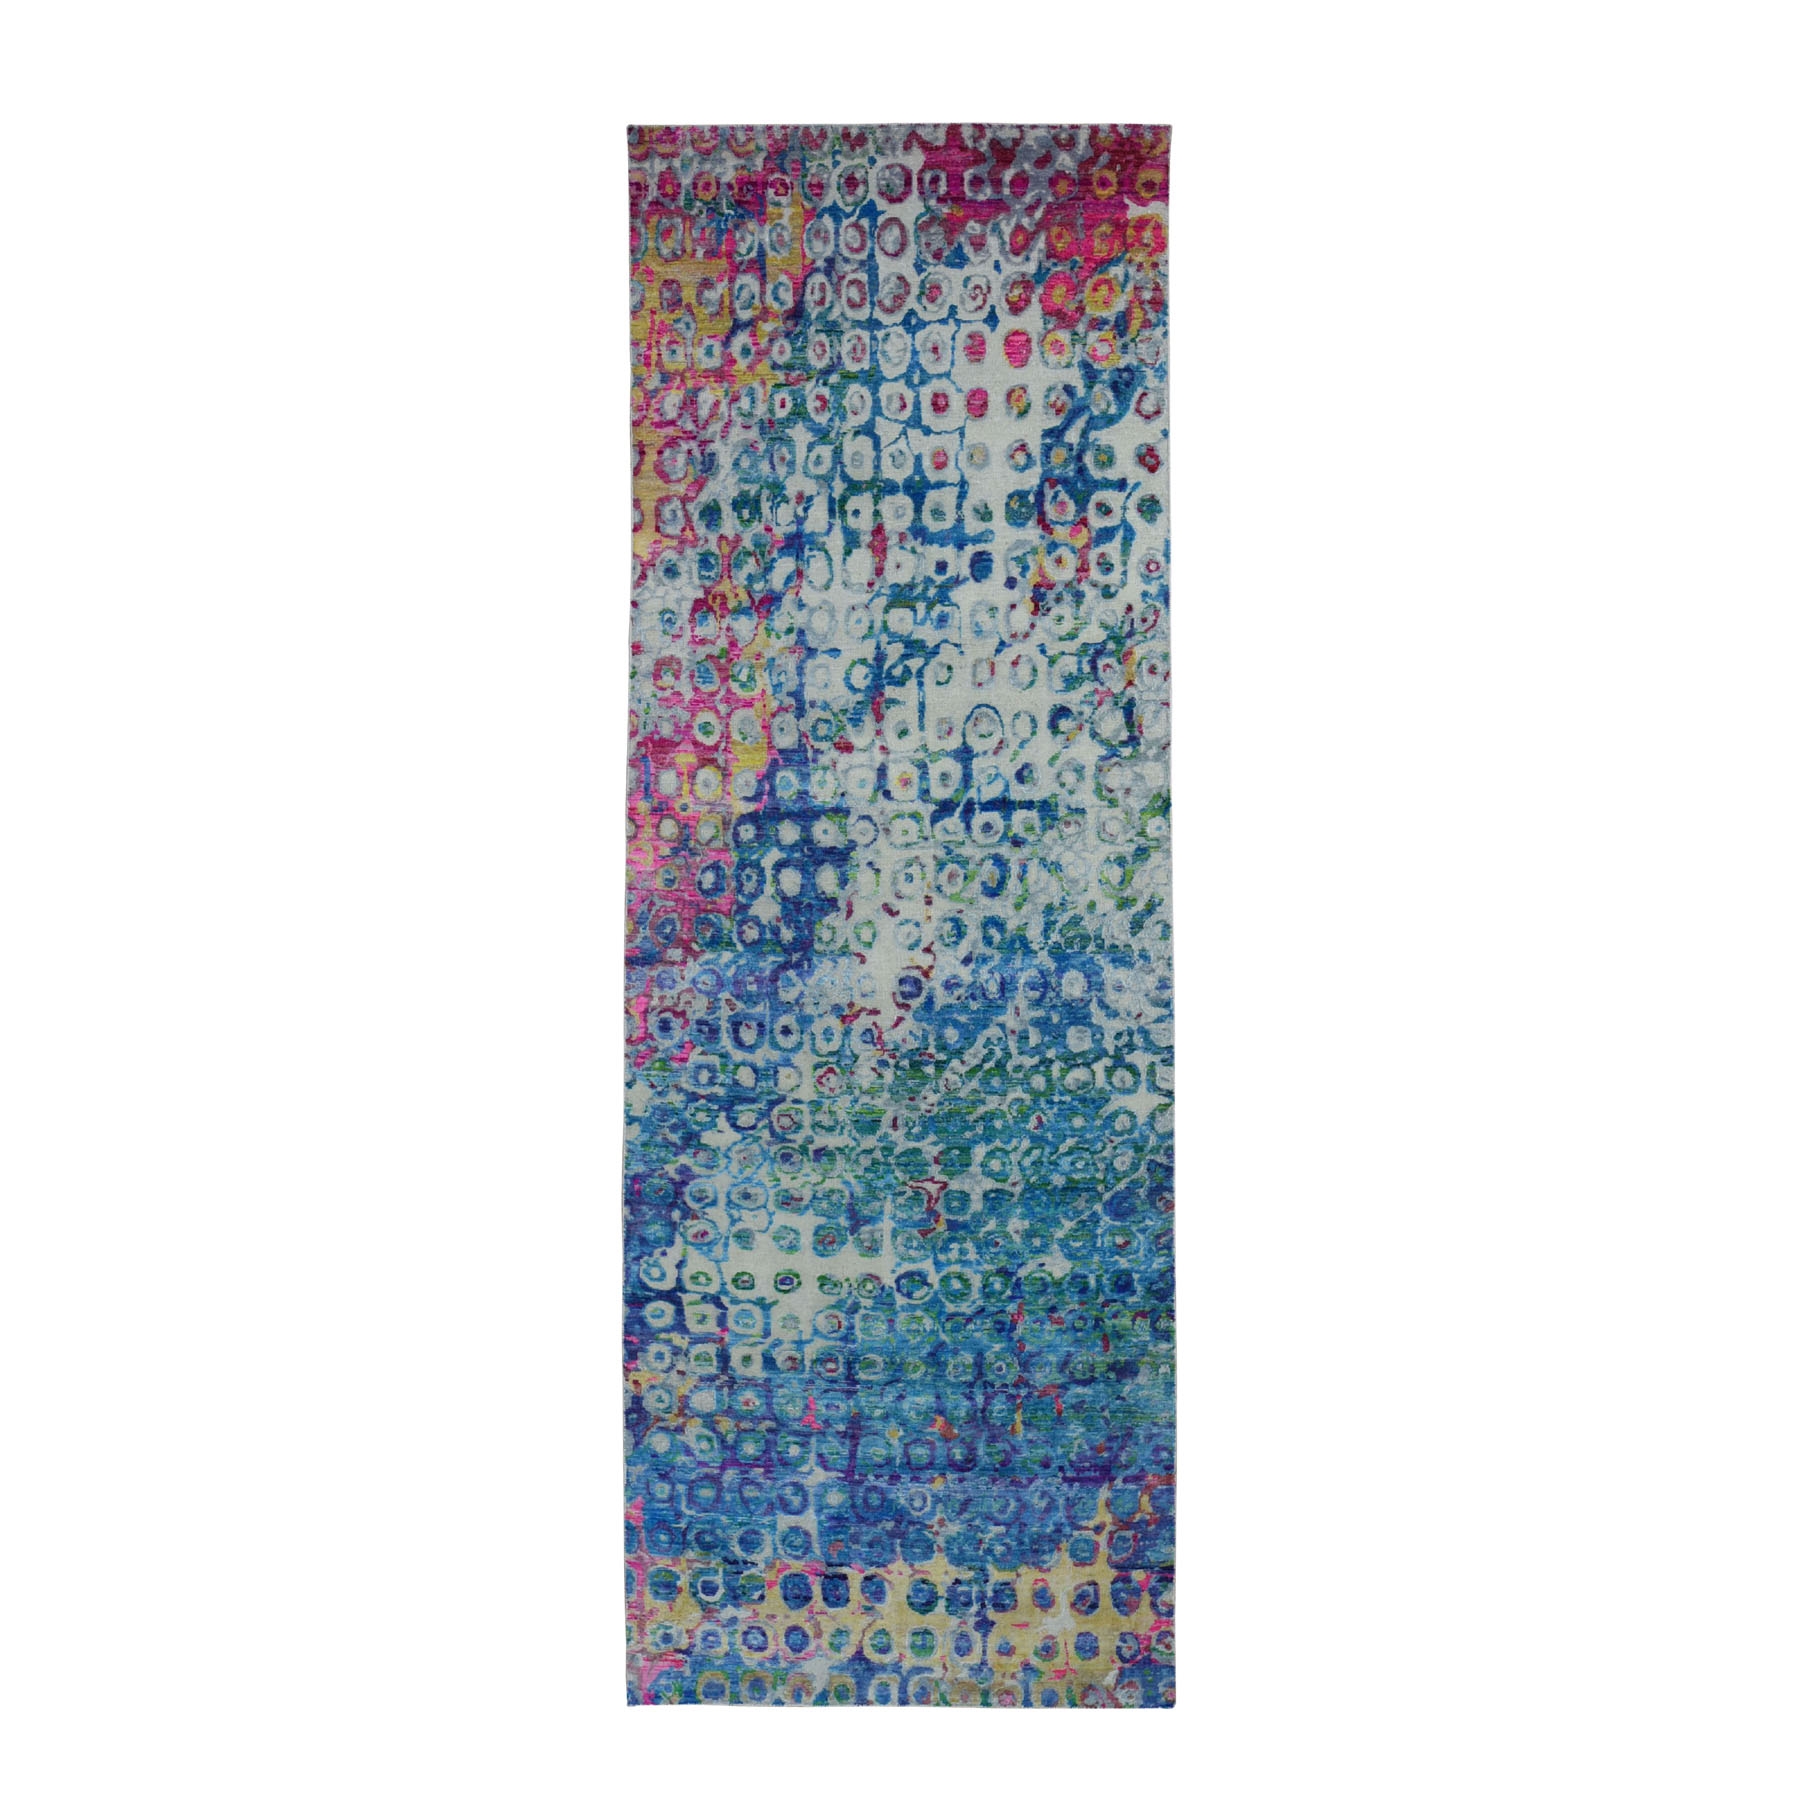 3'X10'2" The Peacock, Sari Silk Colorful Hand Knotted Runner Oriental Rug moad909b